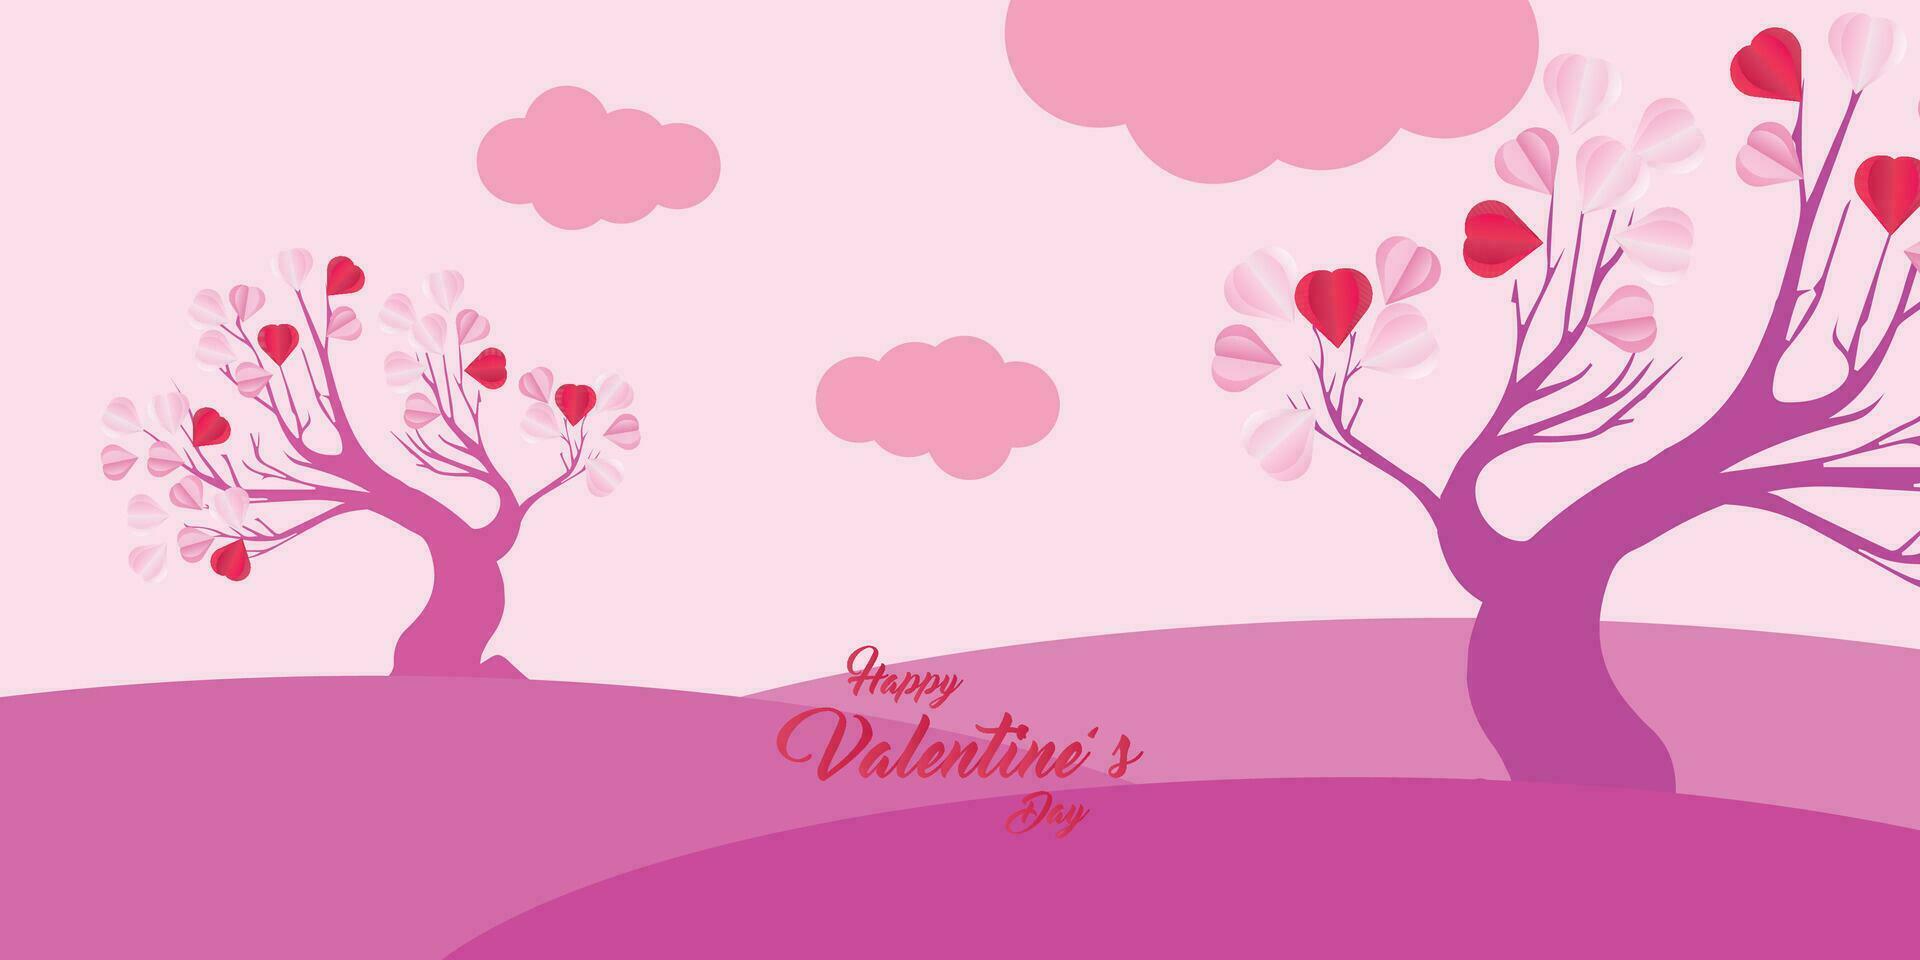 Valentine's day concept love illustration of tree with heart shaped leaves growing in paper cut style vector